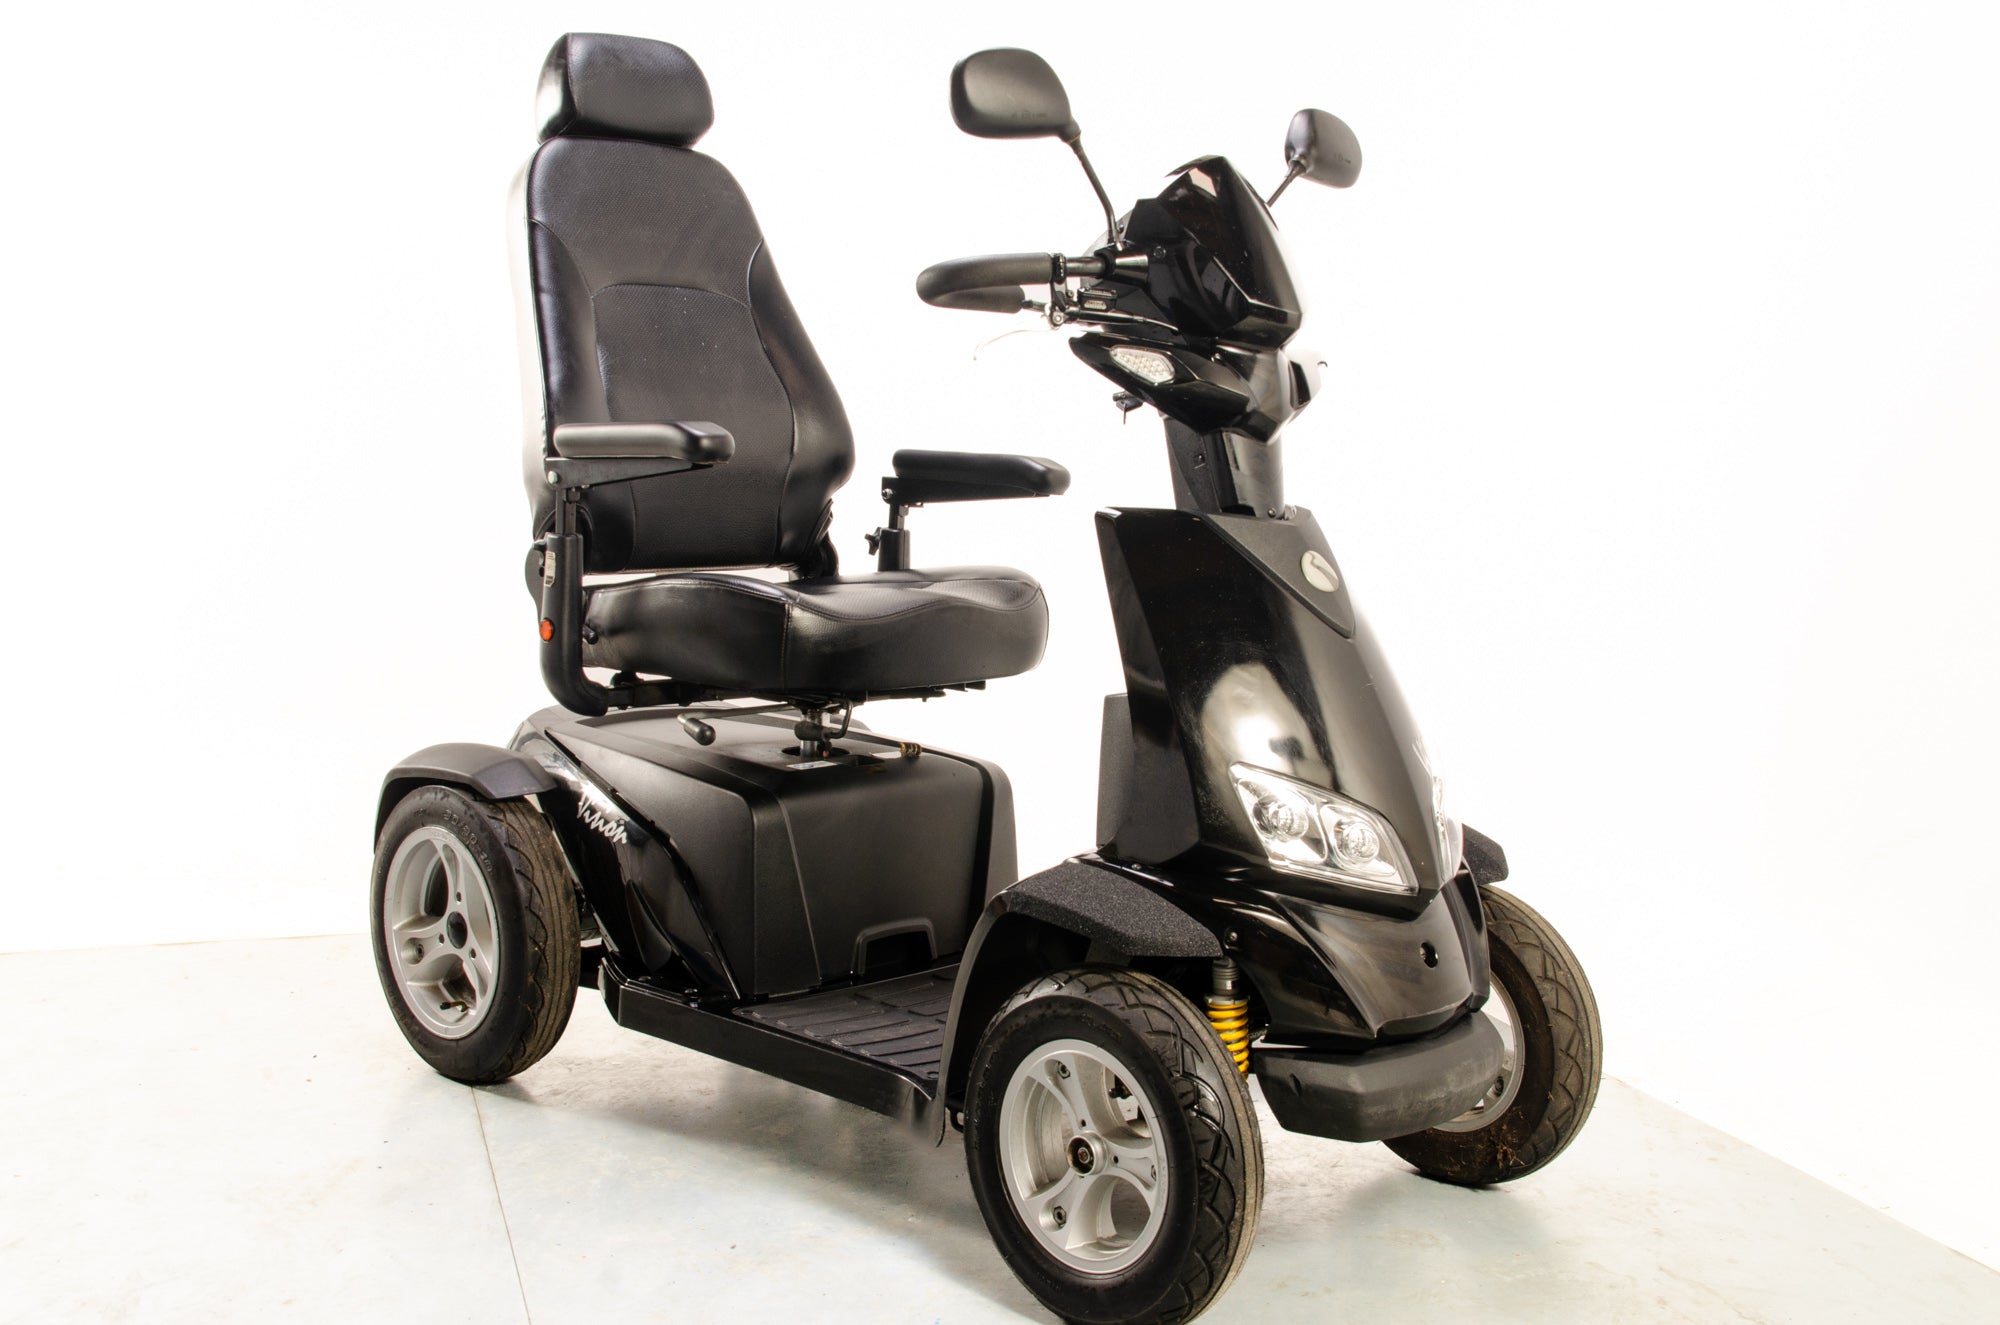 Rascal Vision Used Electric Mobility Scooter 8mph Large All-Terrain Road Legal Black 16007